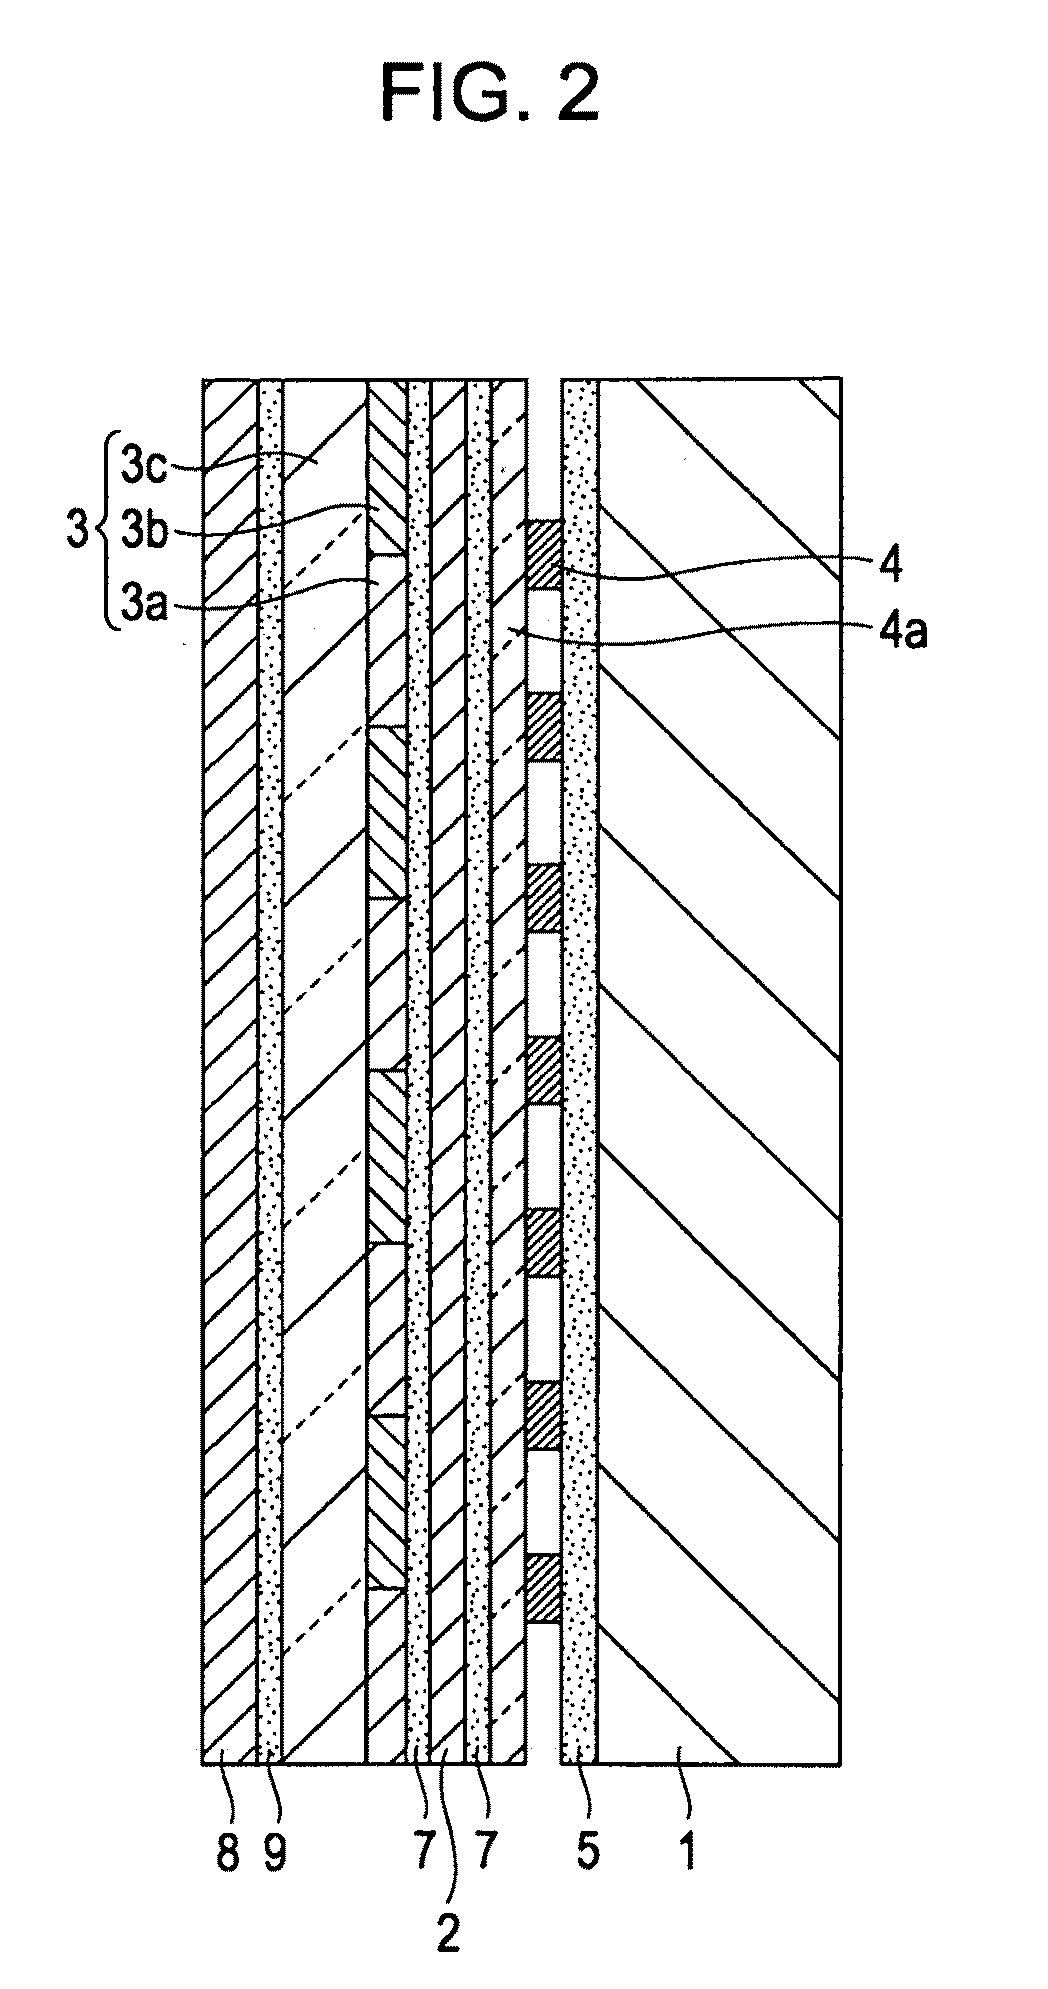 Stereoscopic image display and method for producing the same